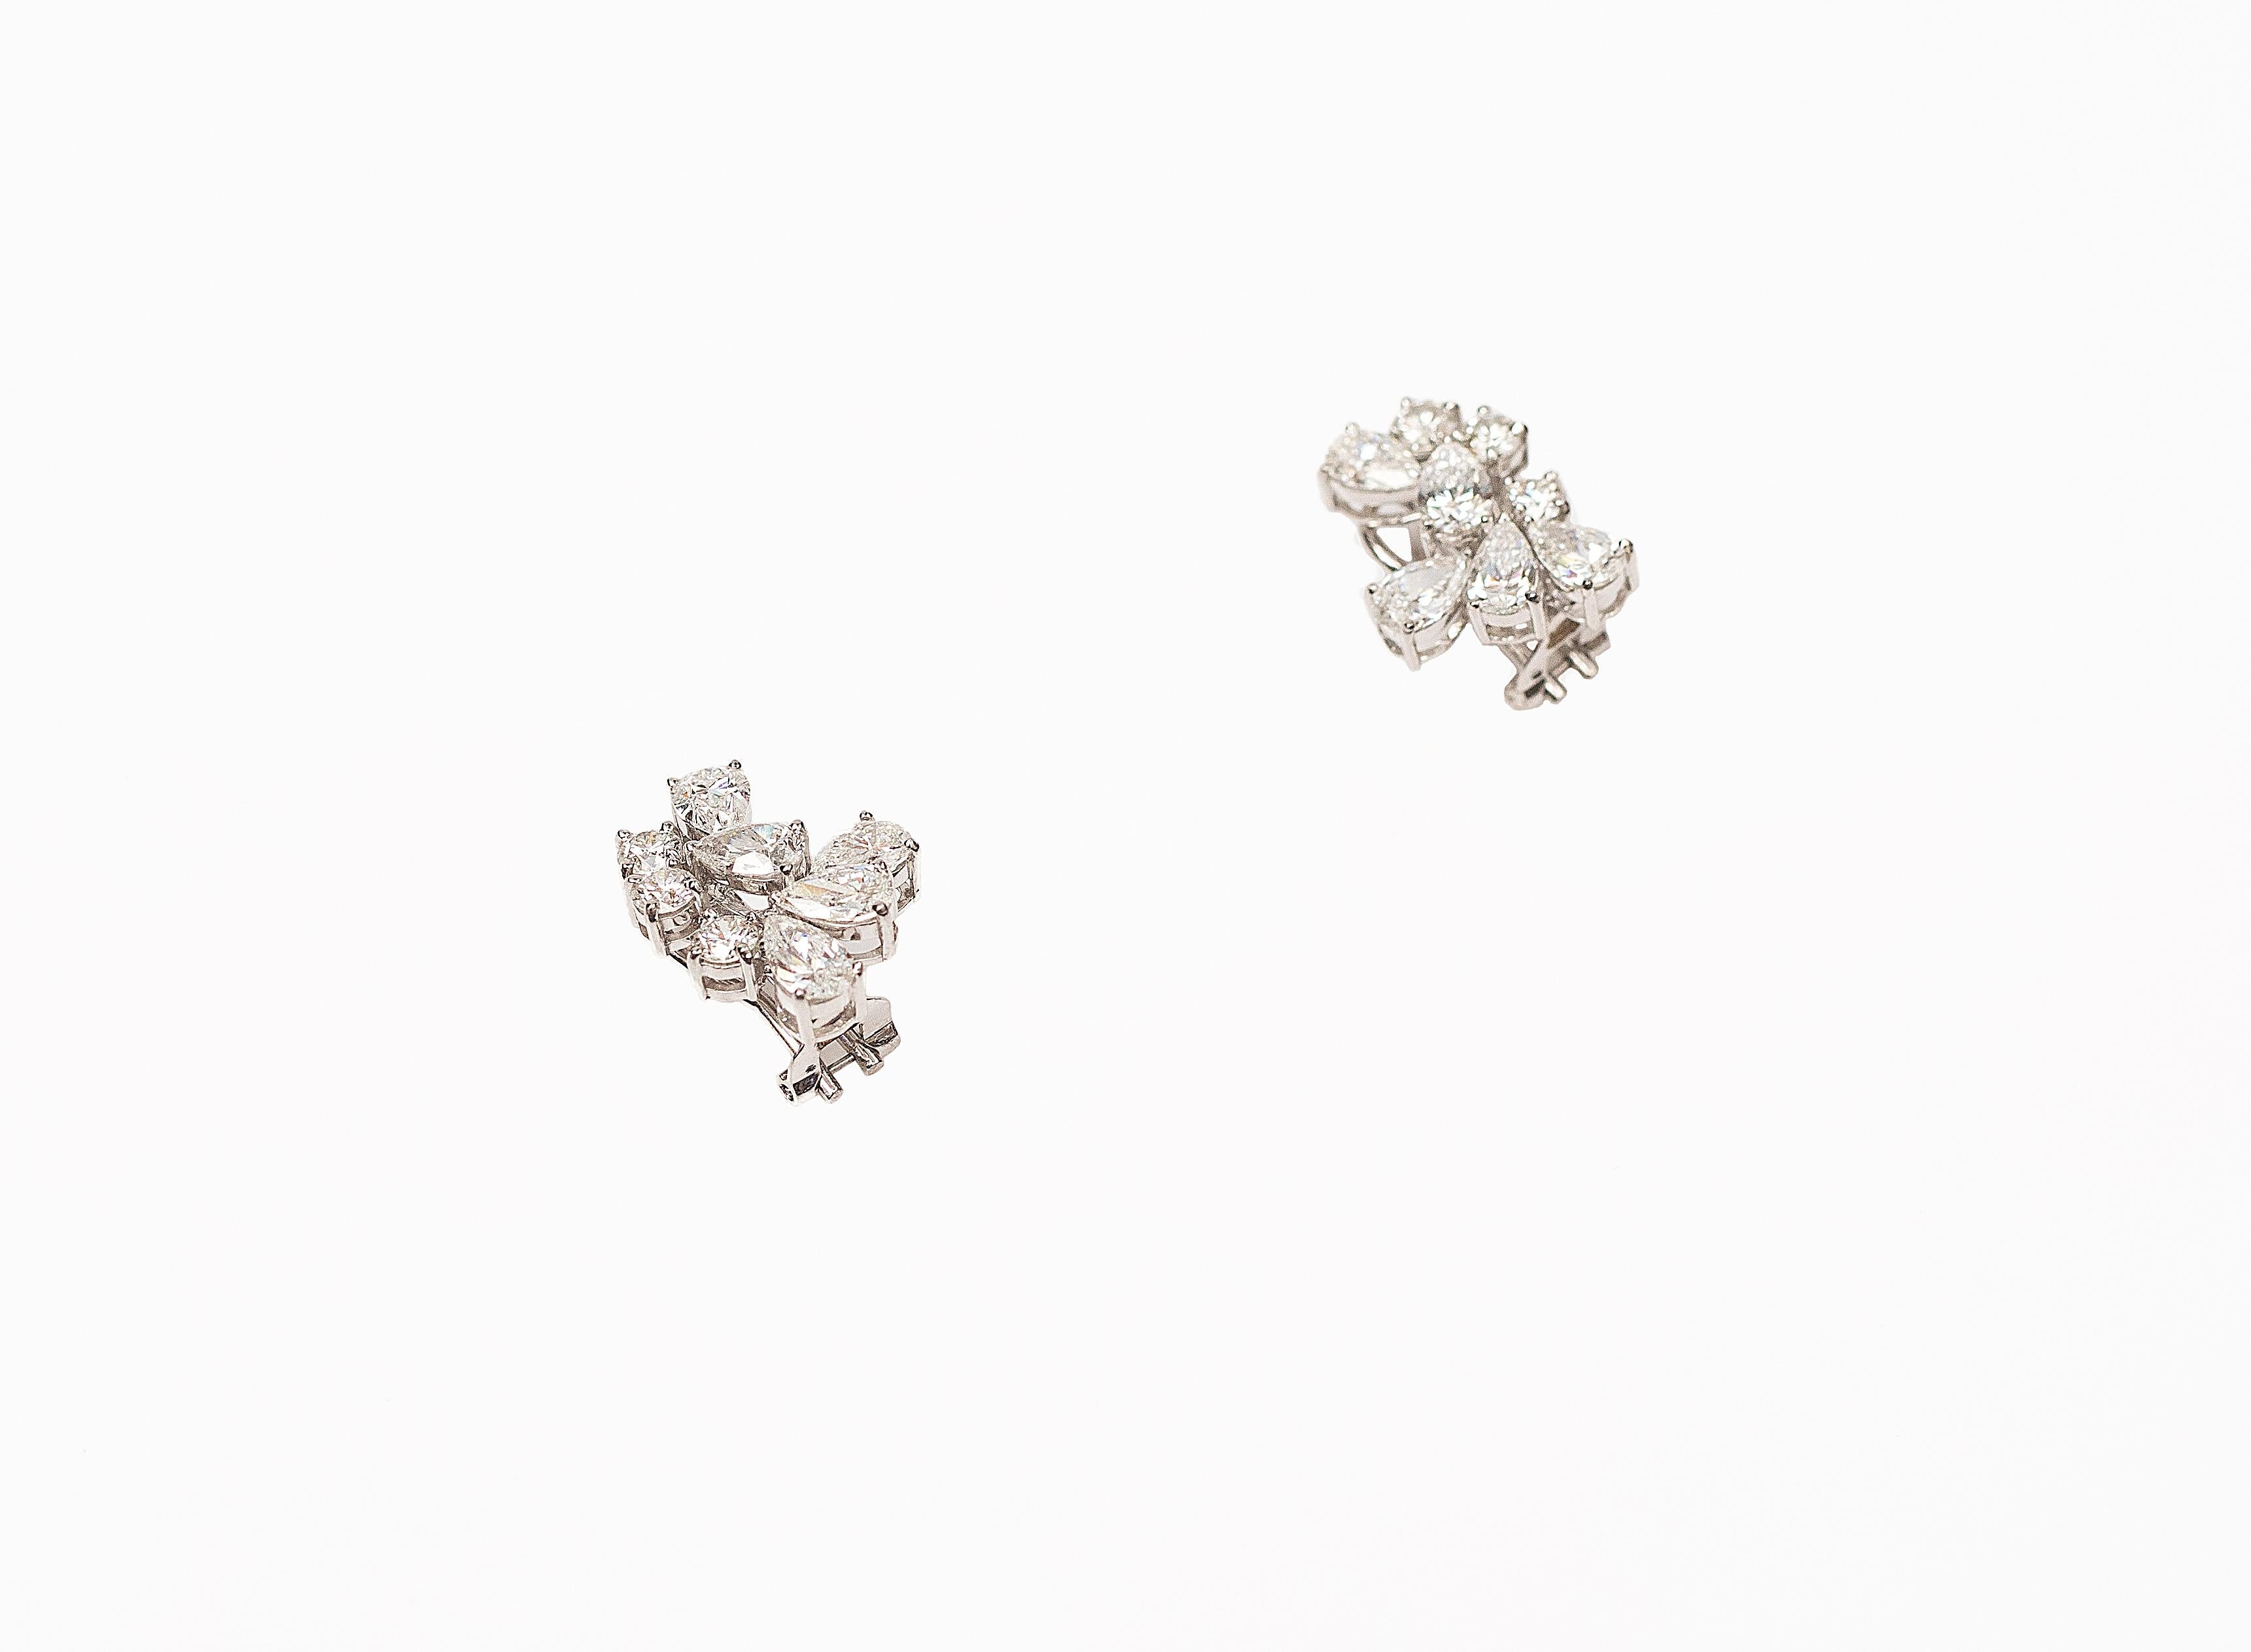 Handcrafted Modern Stud Earrings in 18K Gold Studded with Pear and Round Shape Natural Diamonds.
Gold Weight - 6.222 gms
Diamond Clarity - Vs-Si
Colour - G-H
Shape - Pear and Round
Post and Clip System